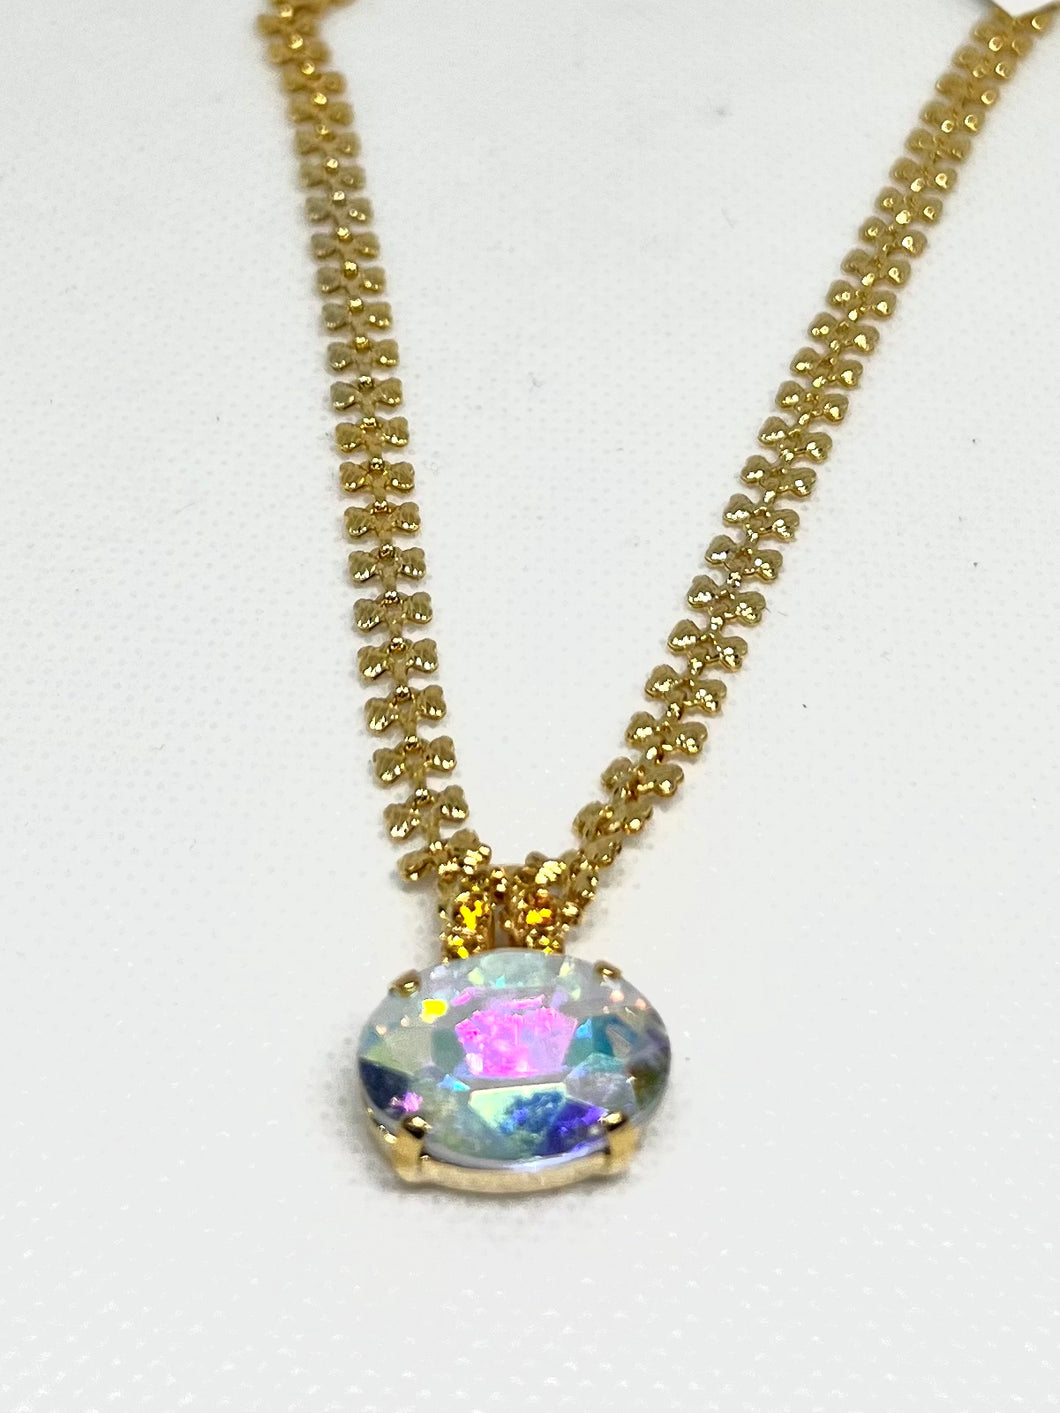 Mariana: Gold Pendant Necklace in “Dawn”